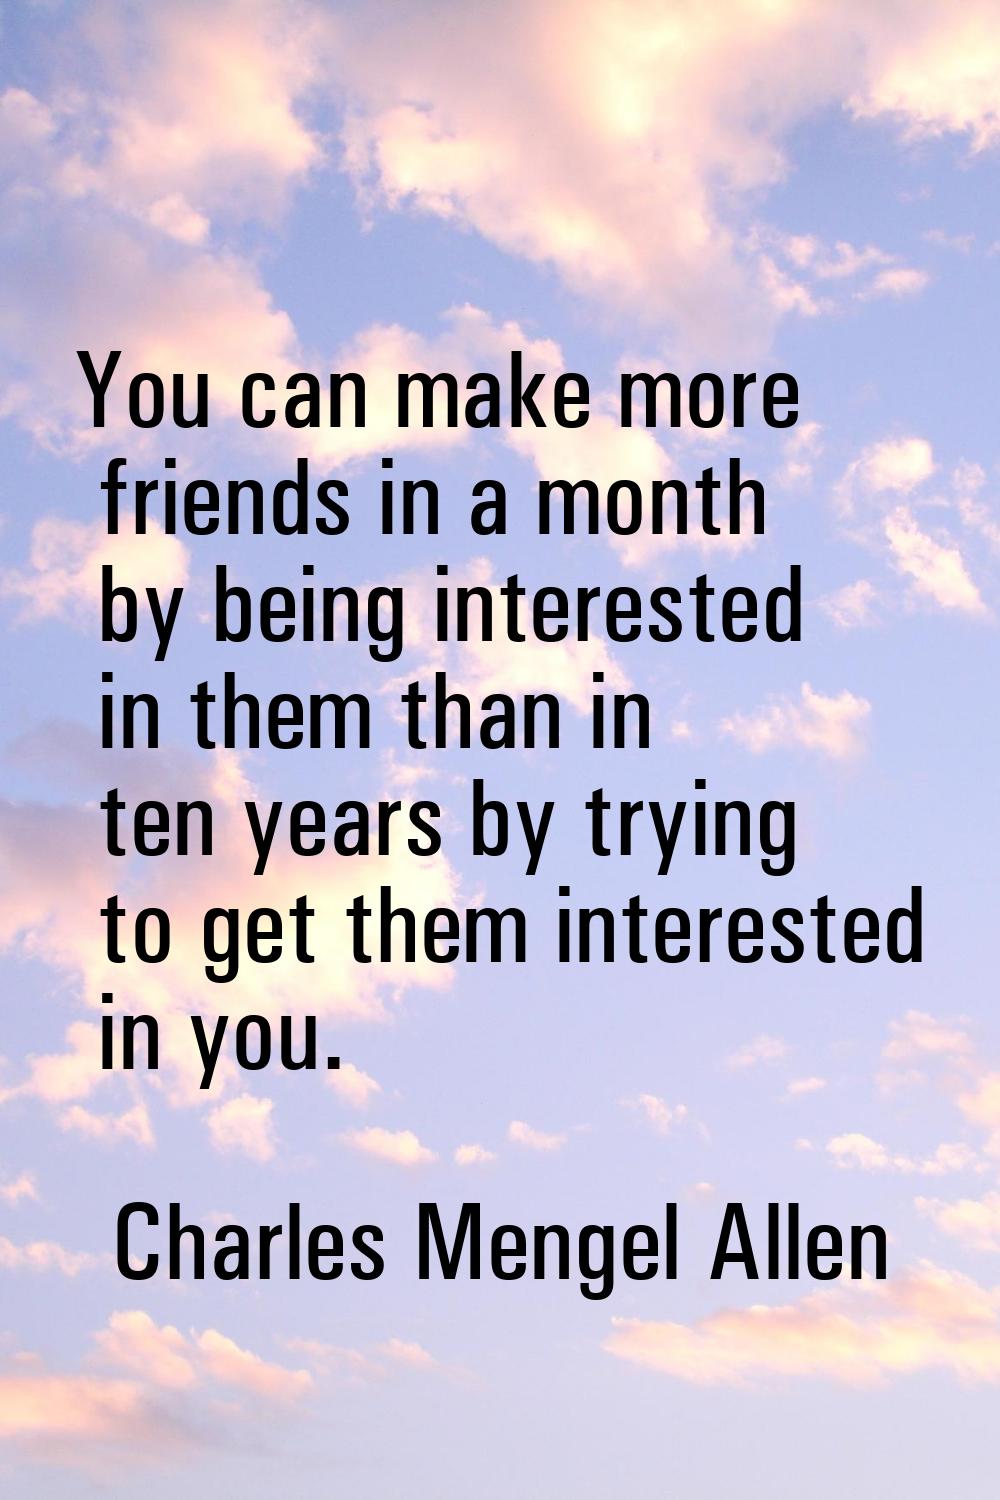 You can make more friends in a month by being interested in them than in ten years by trying to get